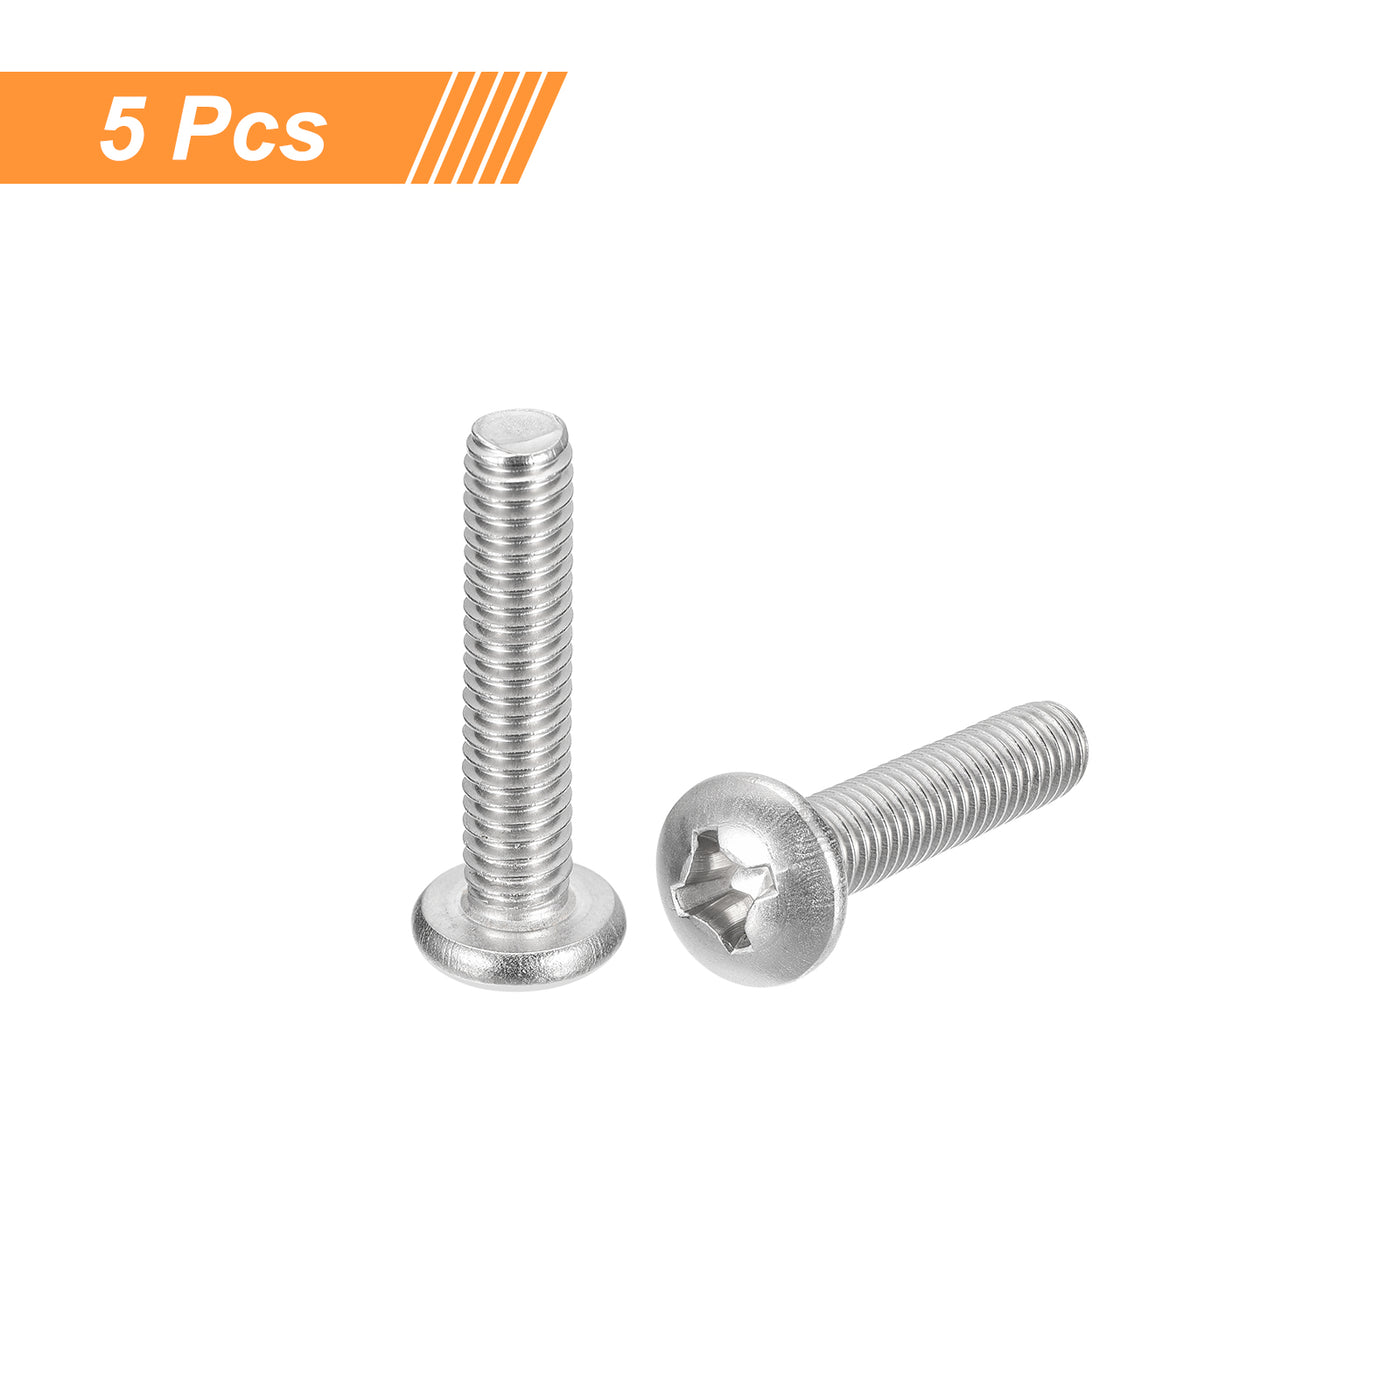 uxcell Uxcell 5/16-18x1-1/2" Pan Head Machine Screws, Stainless Steel 18-8 Screw, Pack of 5